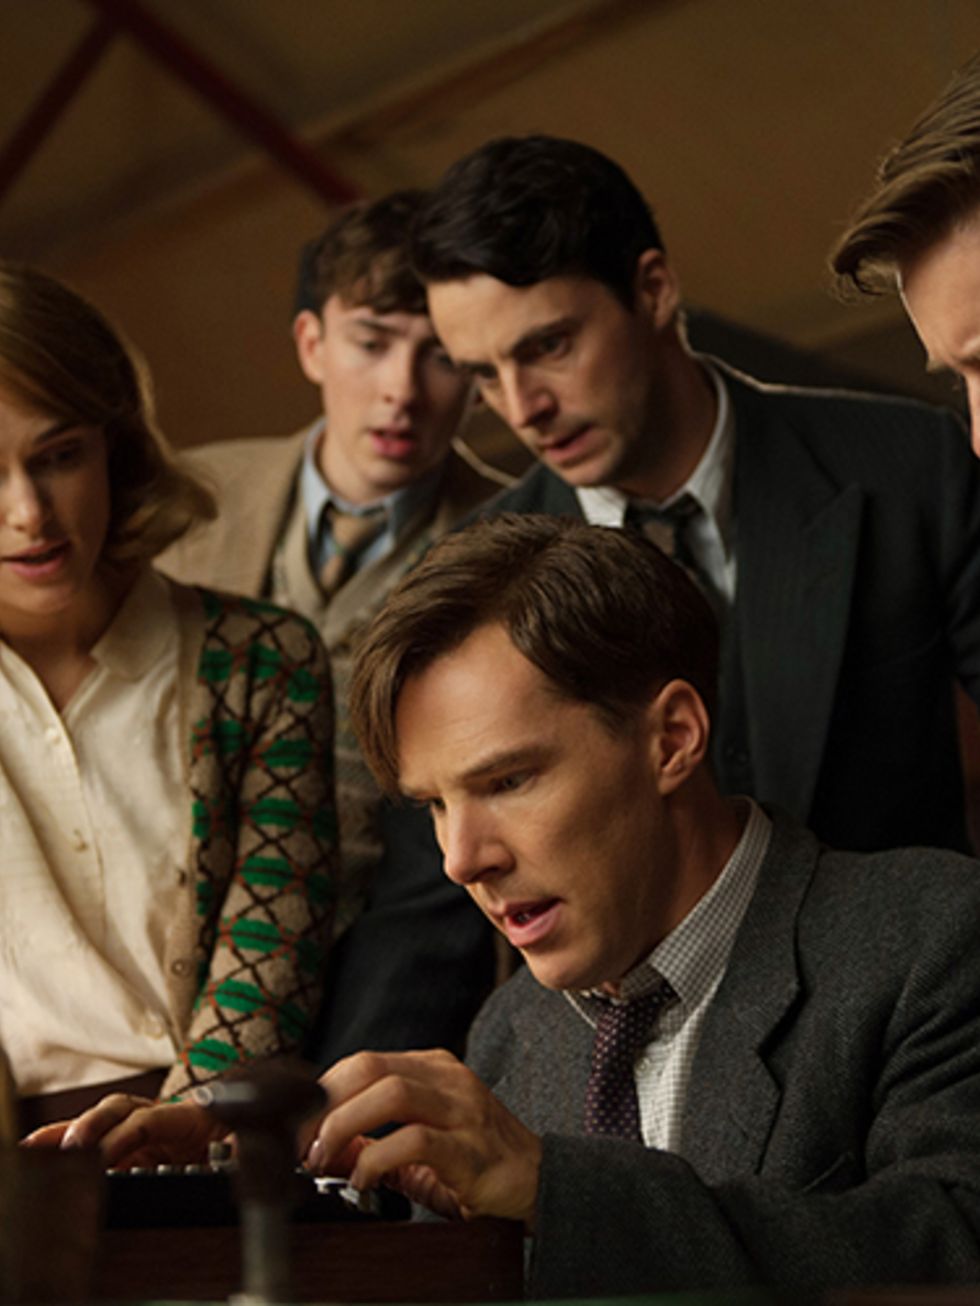 <p><strong>FILM: The Imitation Game</strong></p>

<p>Ever since that interview in our December issue (read it here), we cant get the thought of Benedict Cumberbatch out of our heads. Luckily, hes back on our cinema screens this weekend with a leading ro